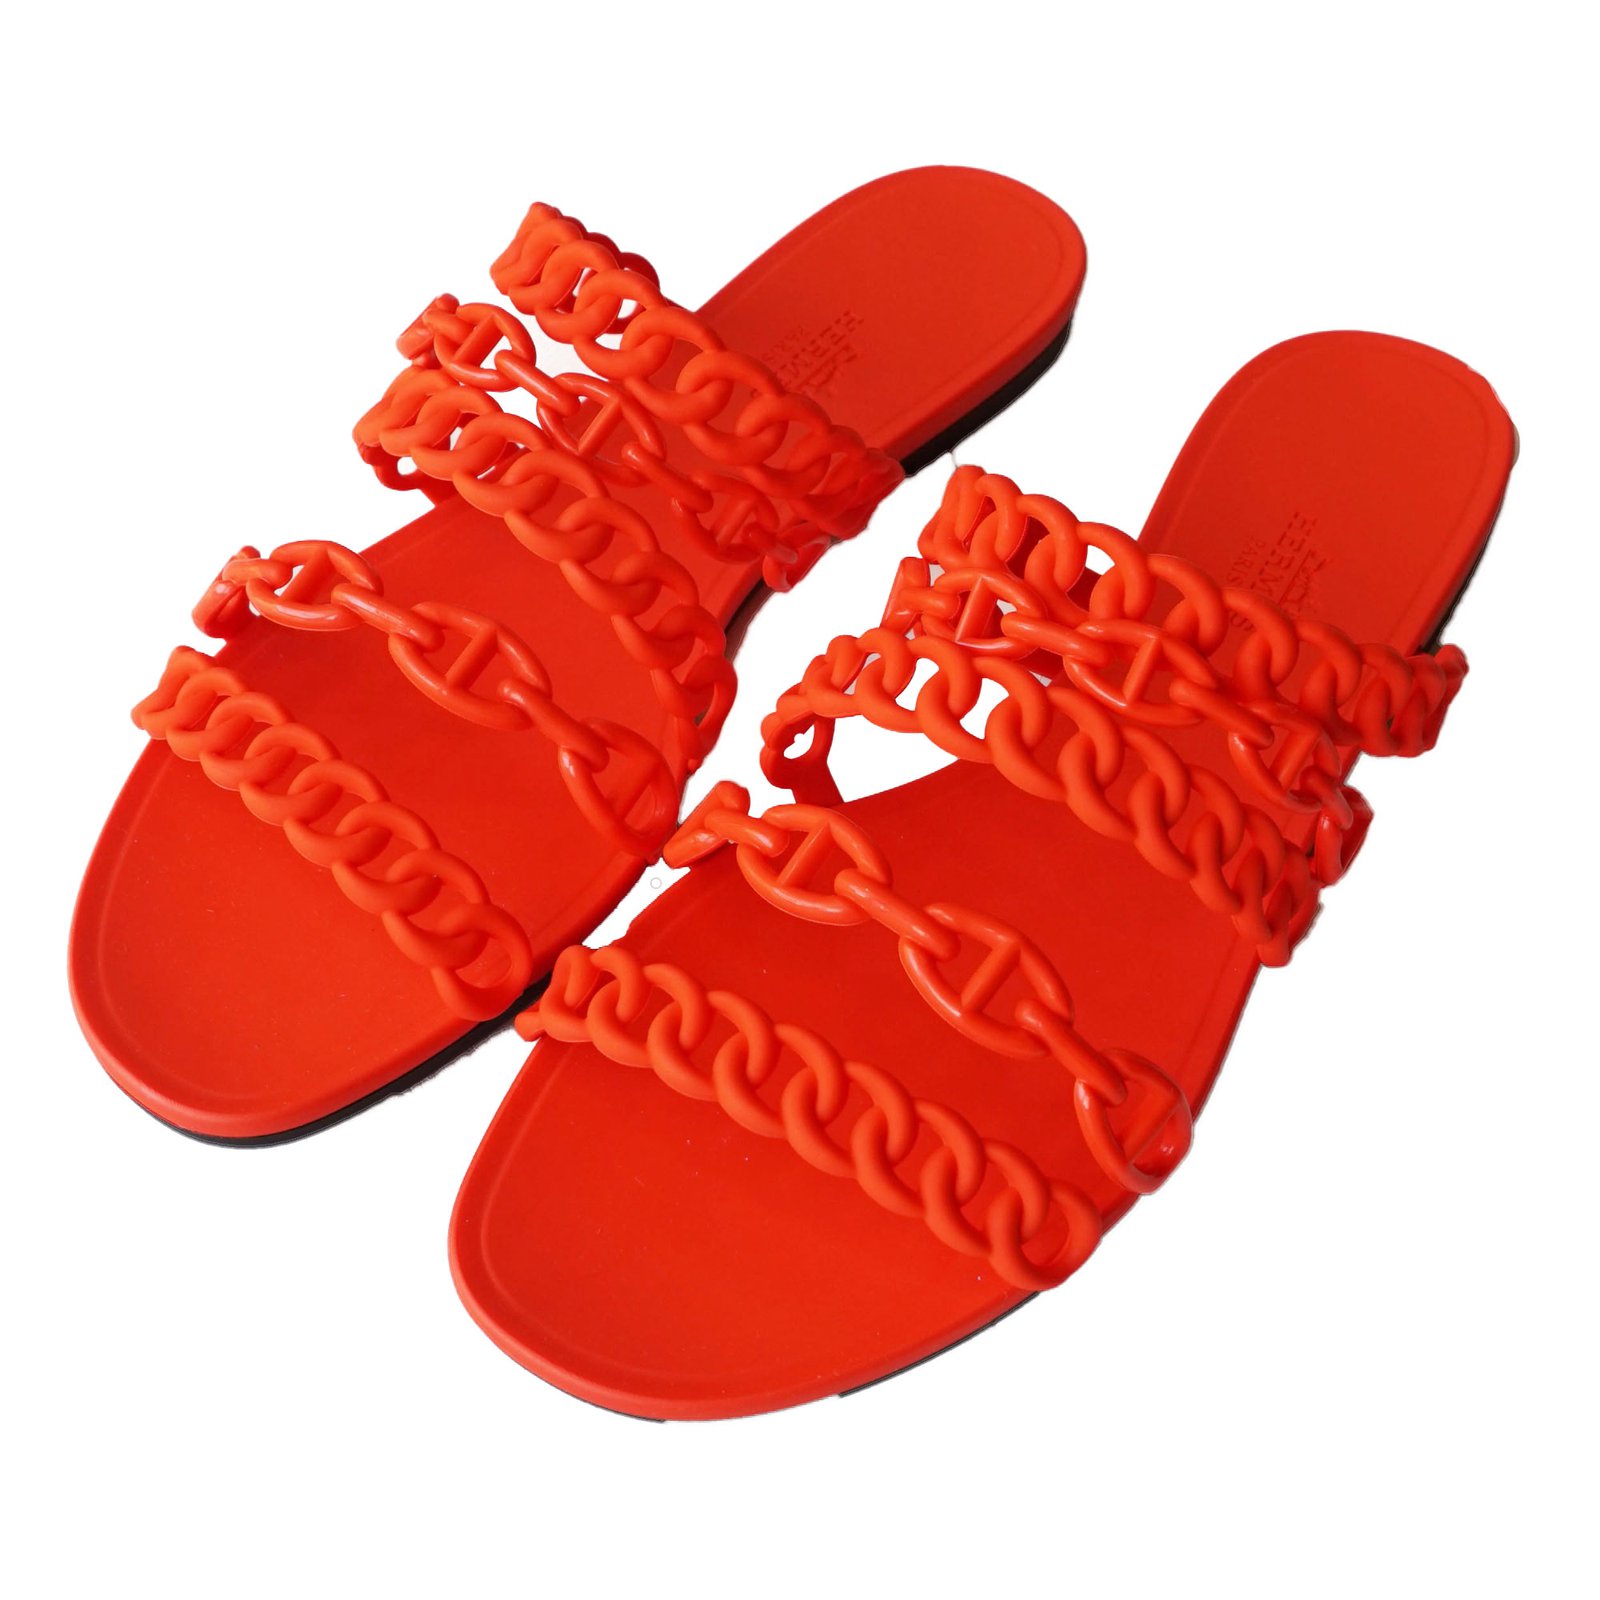 hermes jelly sandals review